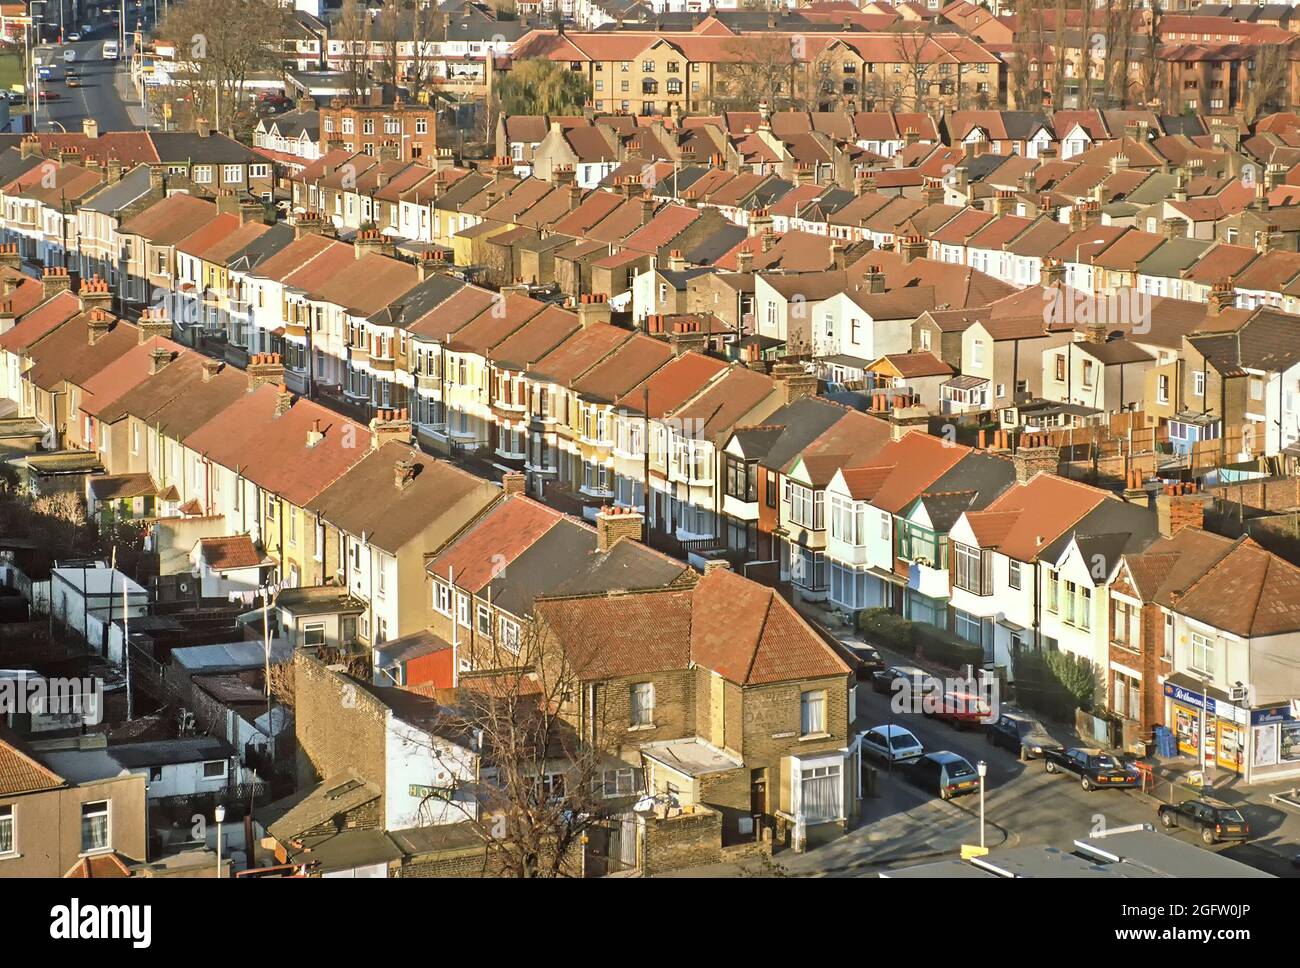 Archive 1989 winter sunshine in aerial view of 1980s roof tops on terraced housing blocks with small back gardens in straight line streets full of parked cars in this densely populated 80s archival image of an urban landscape in the town of Barking in East London borough of Barking and Dagenham England UK Stock Photo